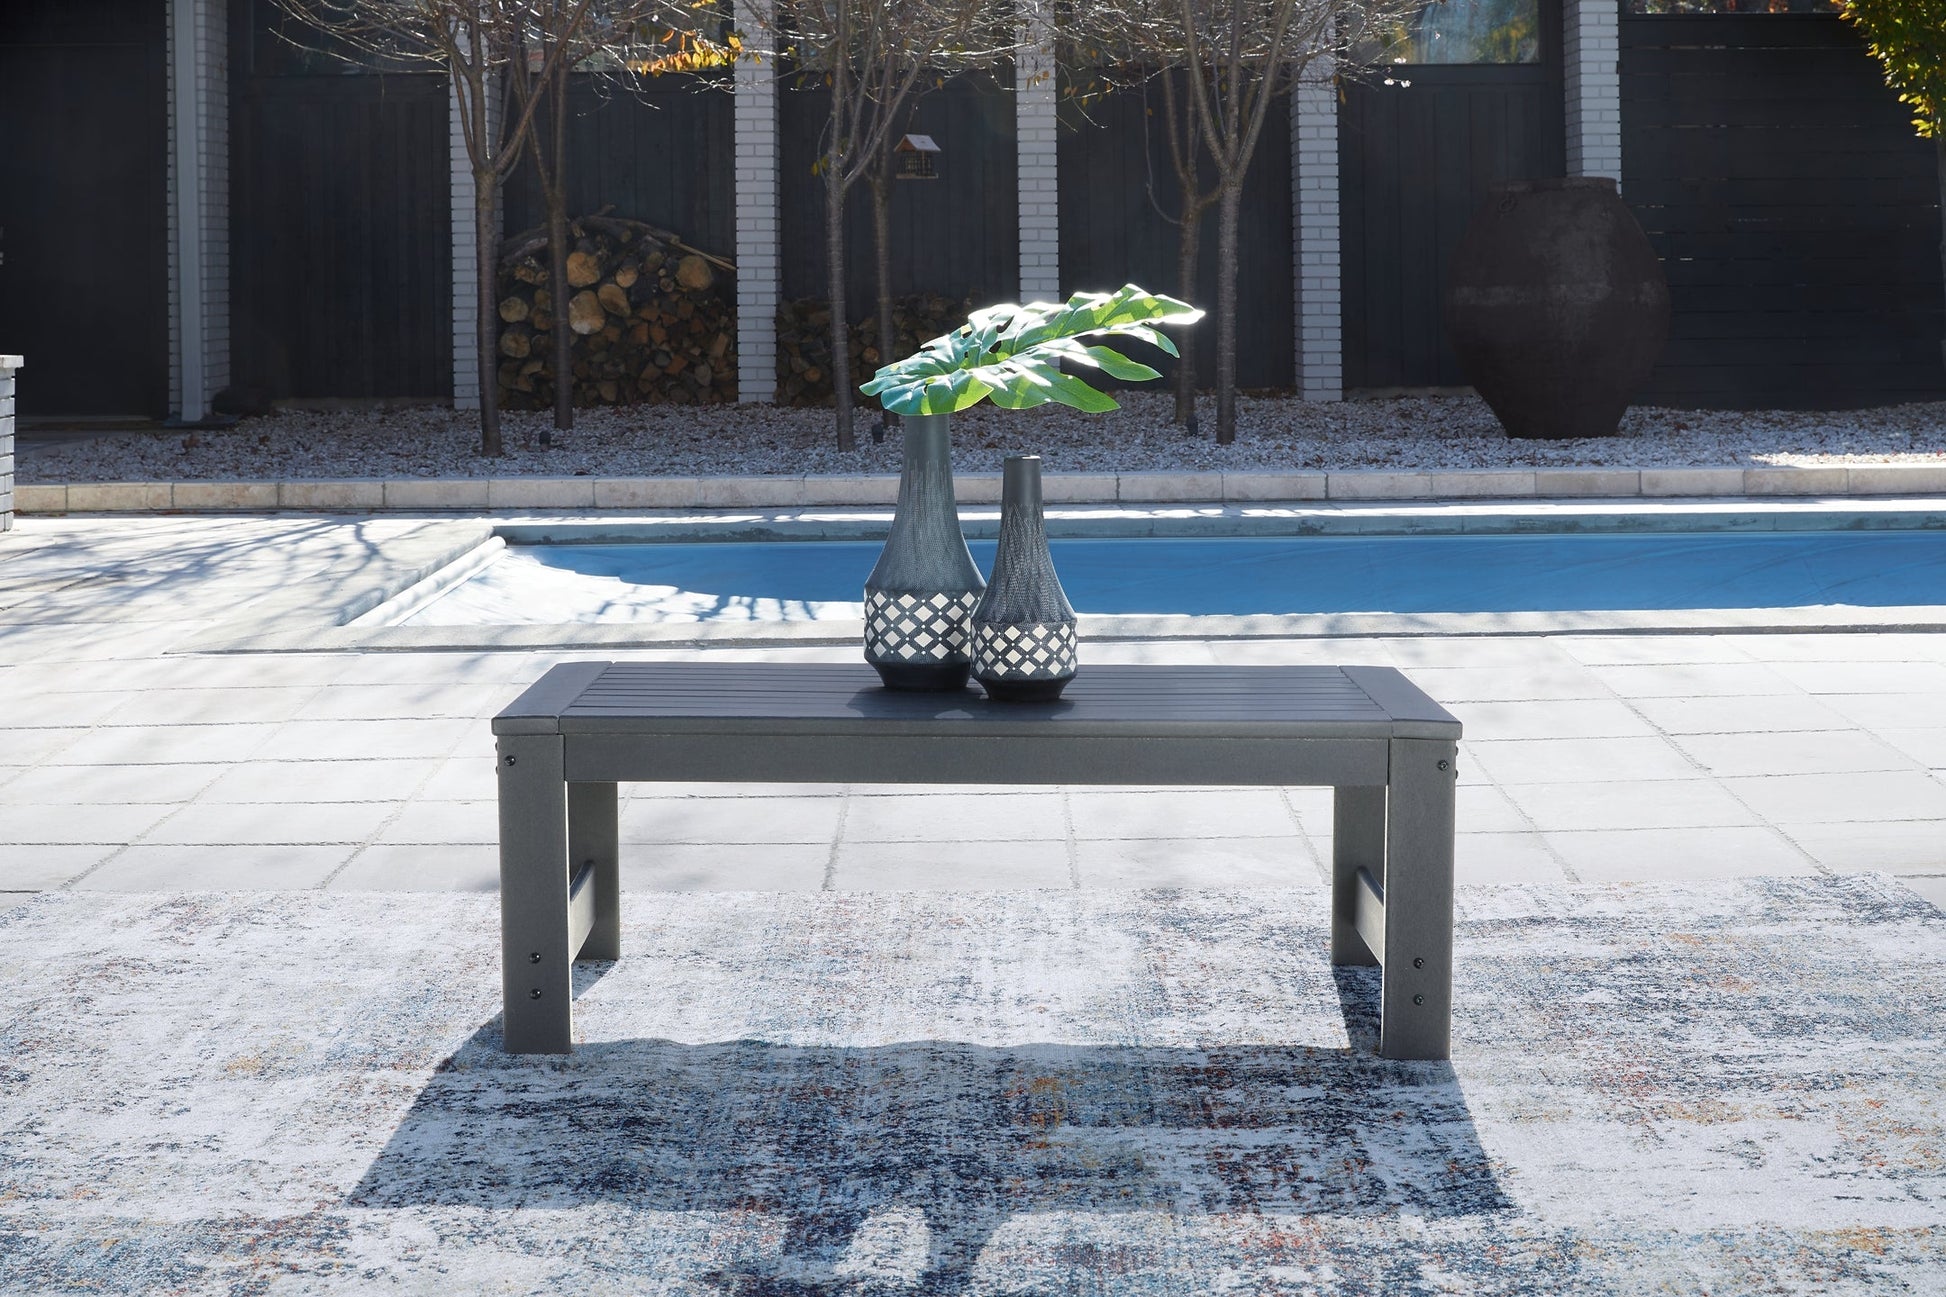 Amora Outdoor Loveseat with Coffee Table Smyrna Furniture Outlet